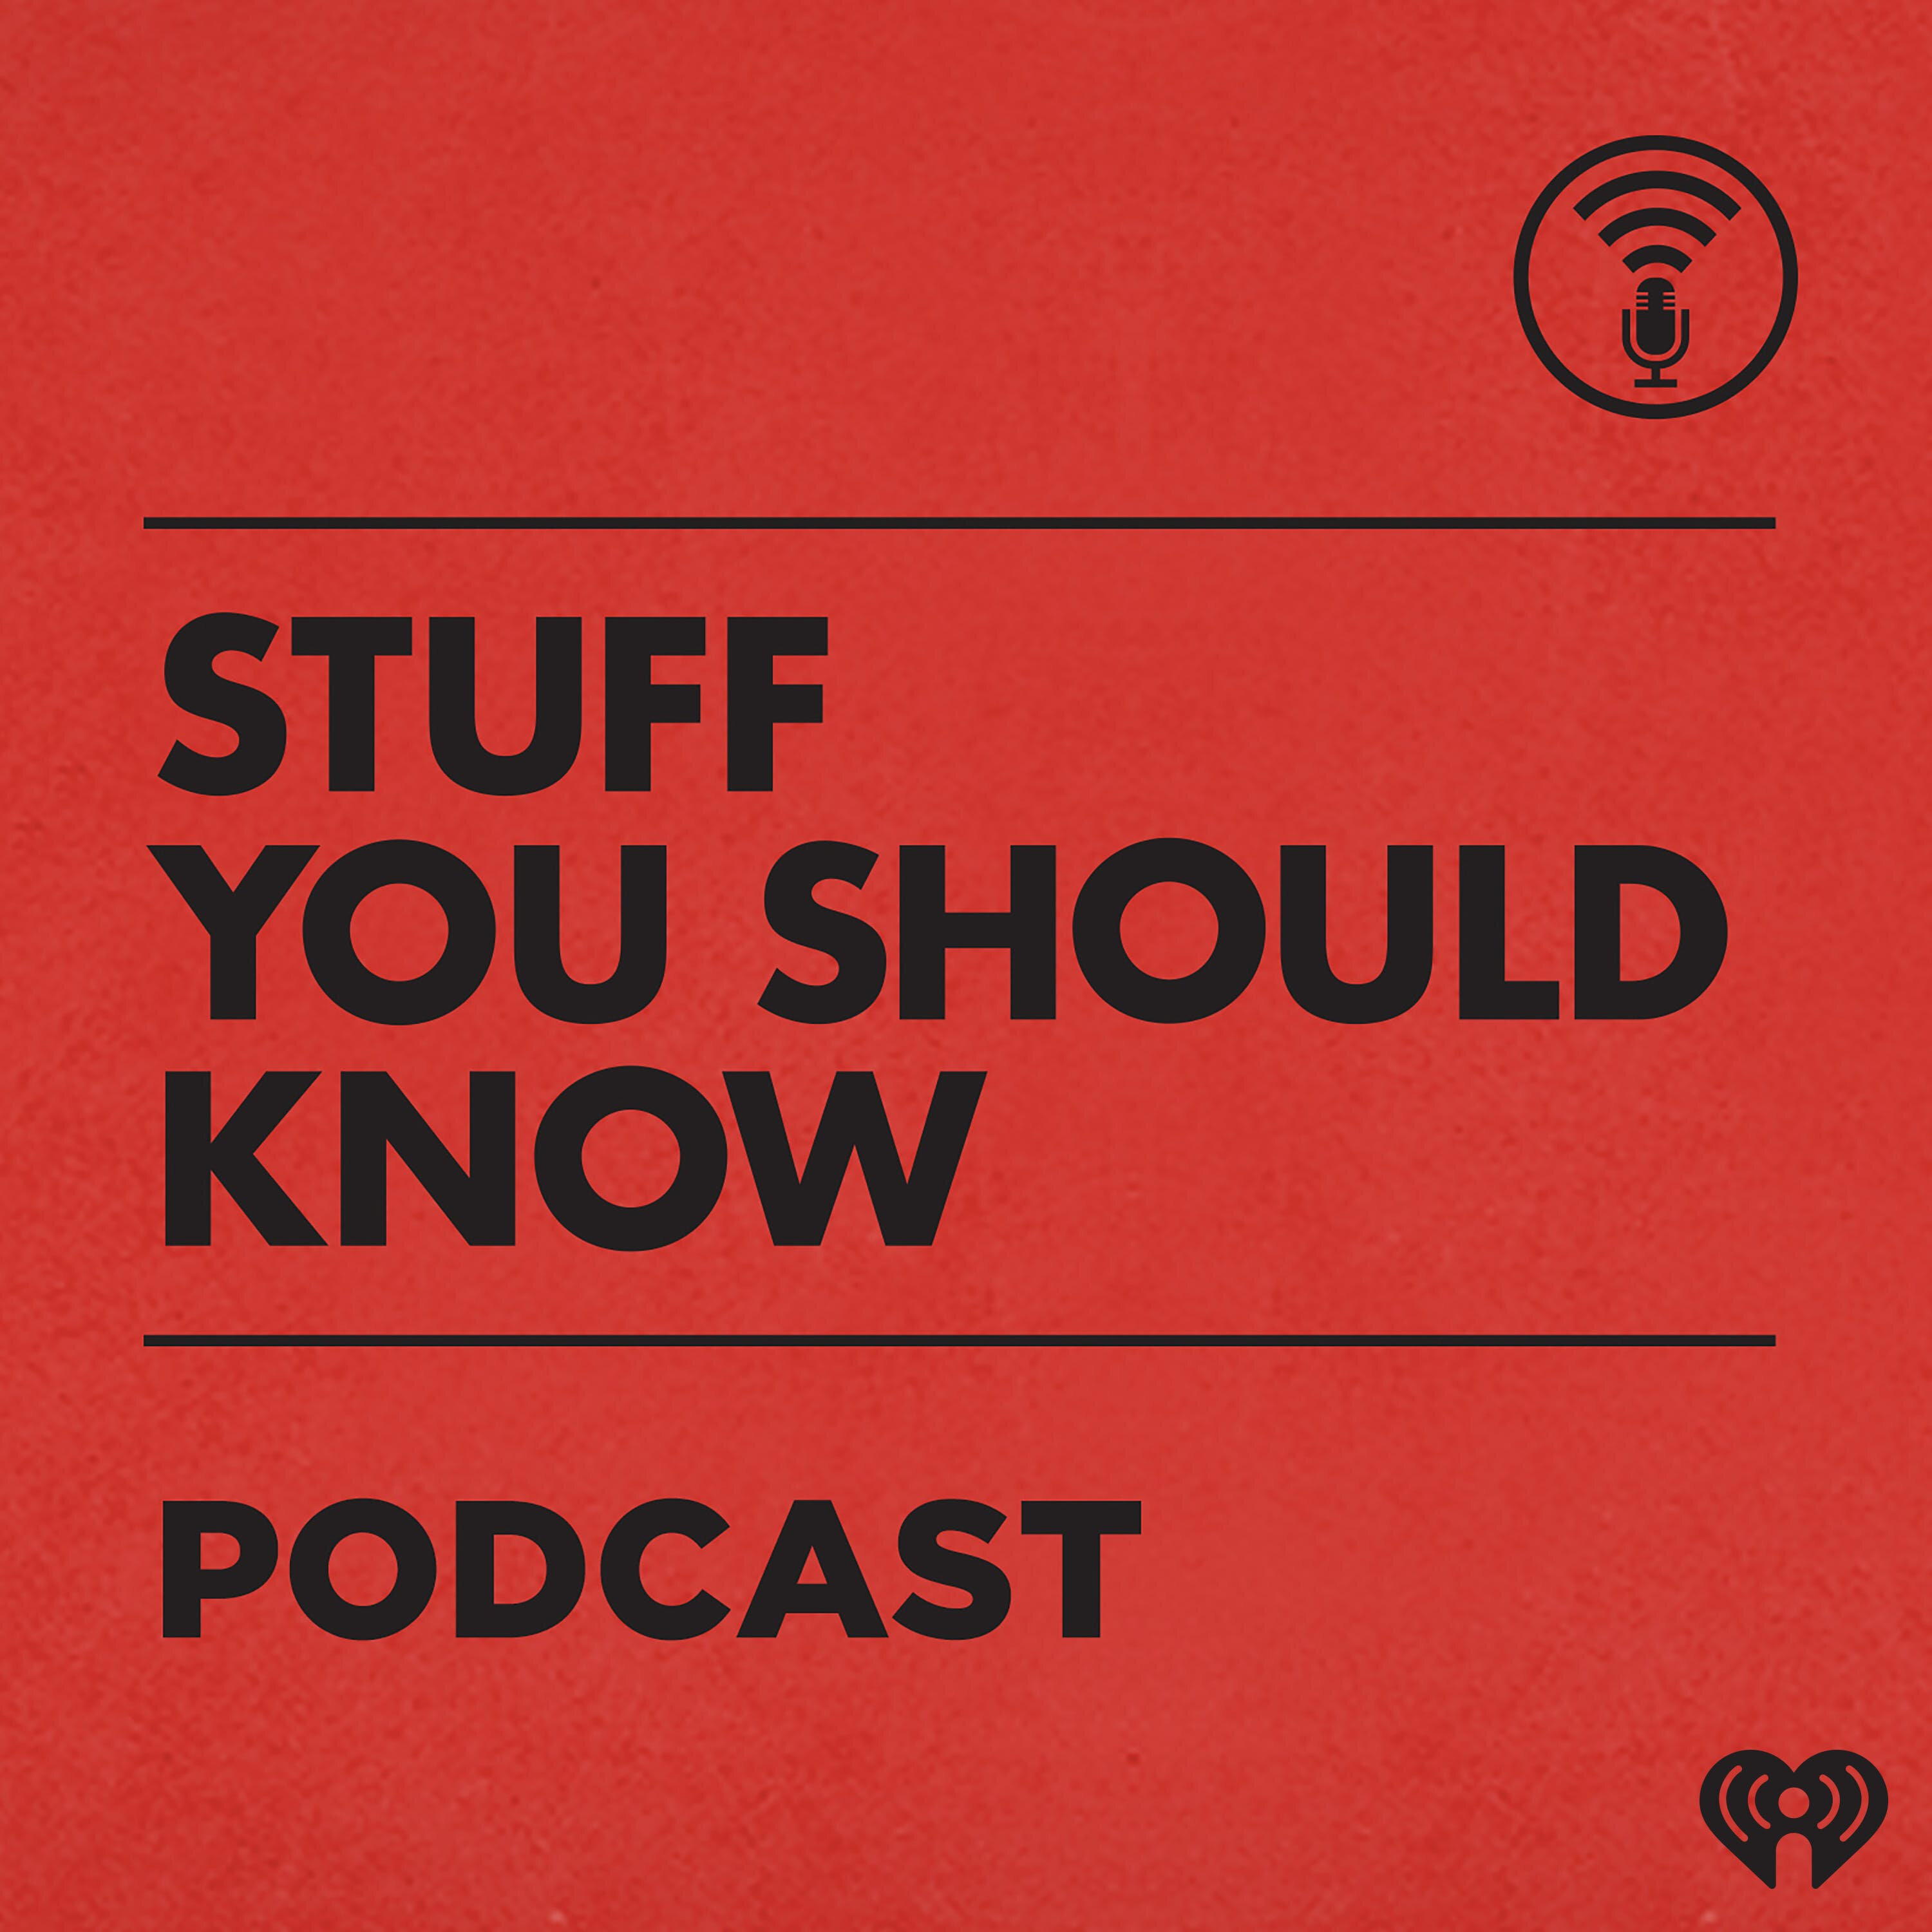 Buzz Aldrin, Neil Armstrong And Michael Collins discussed on Stuff You Should Know